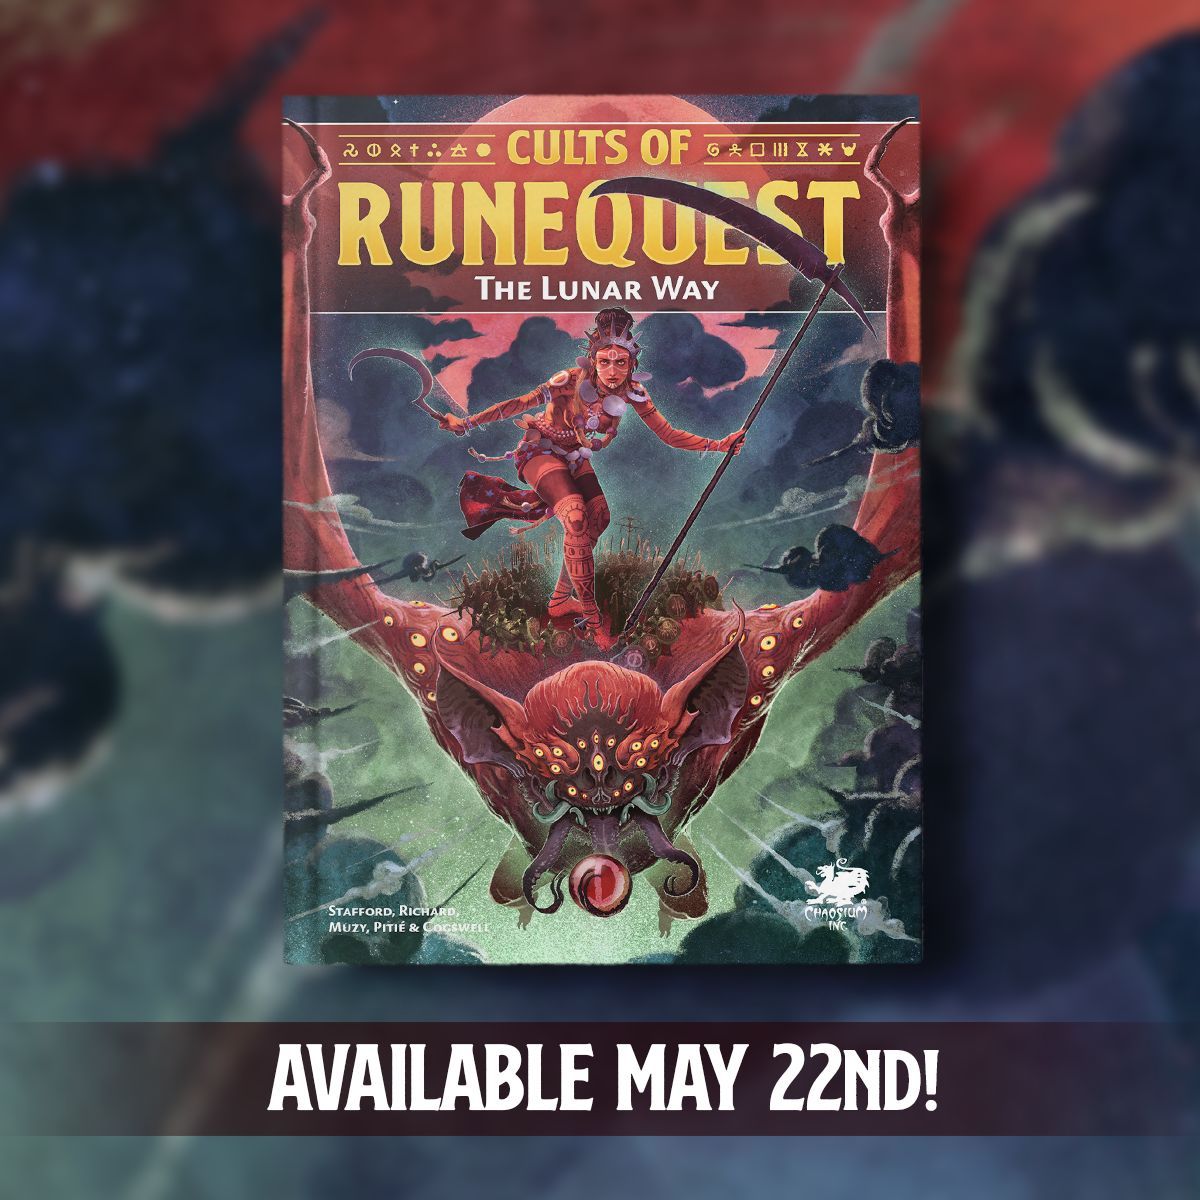 The secrets of the dreaded Lunar cults will soon be revealed!

What are you most excited to see from this upcoming RuneQuest title?